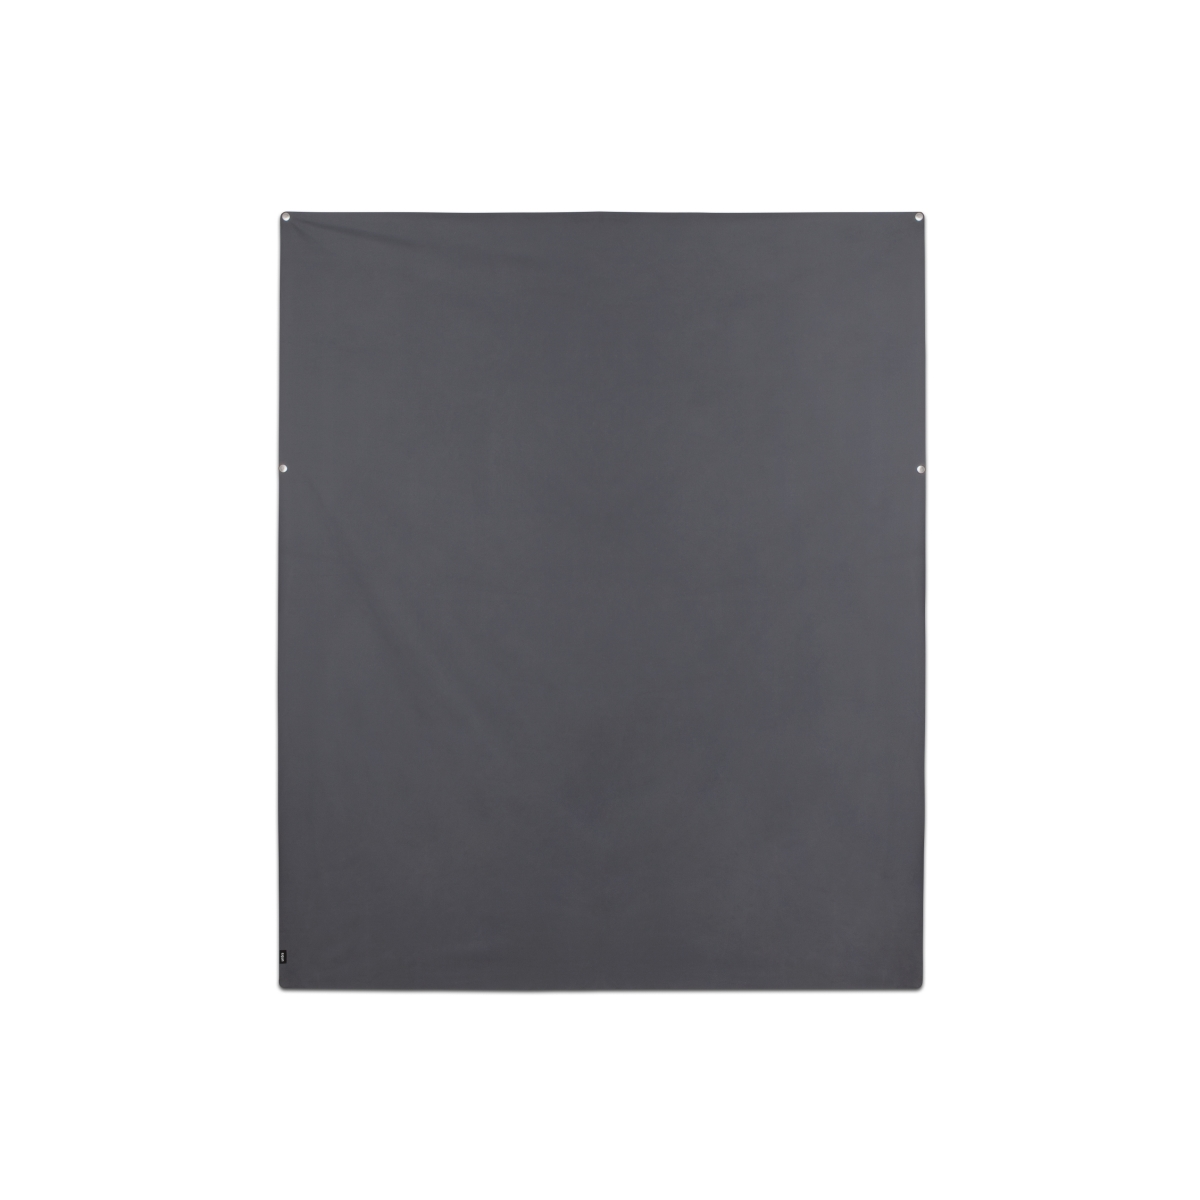 1011301-149 48 X 56 In. Complete Blackout Panel - Charcoal